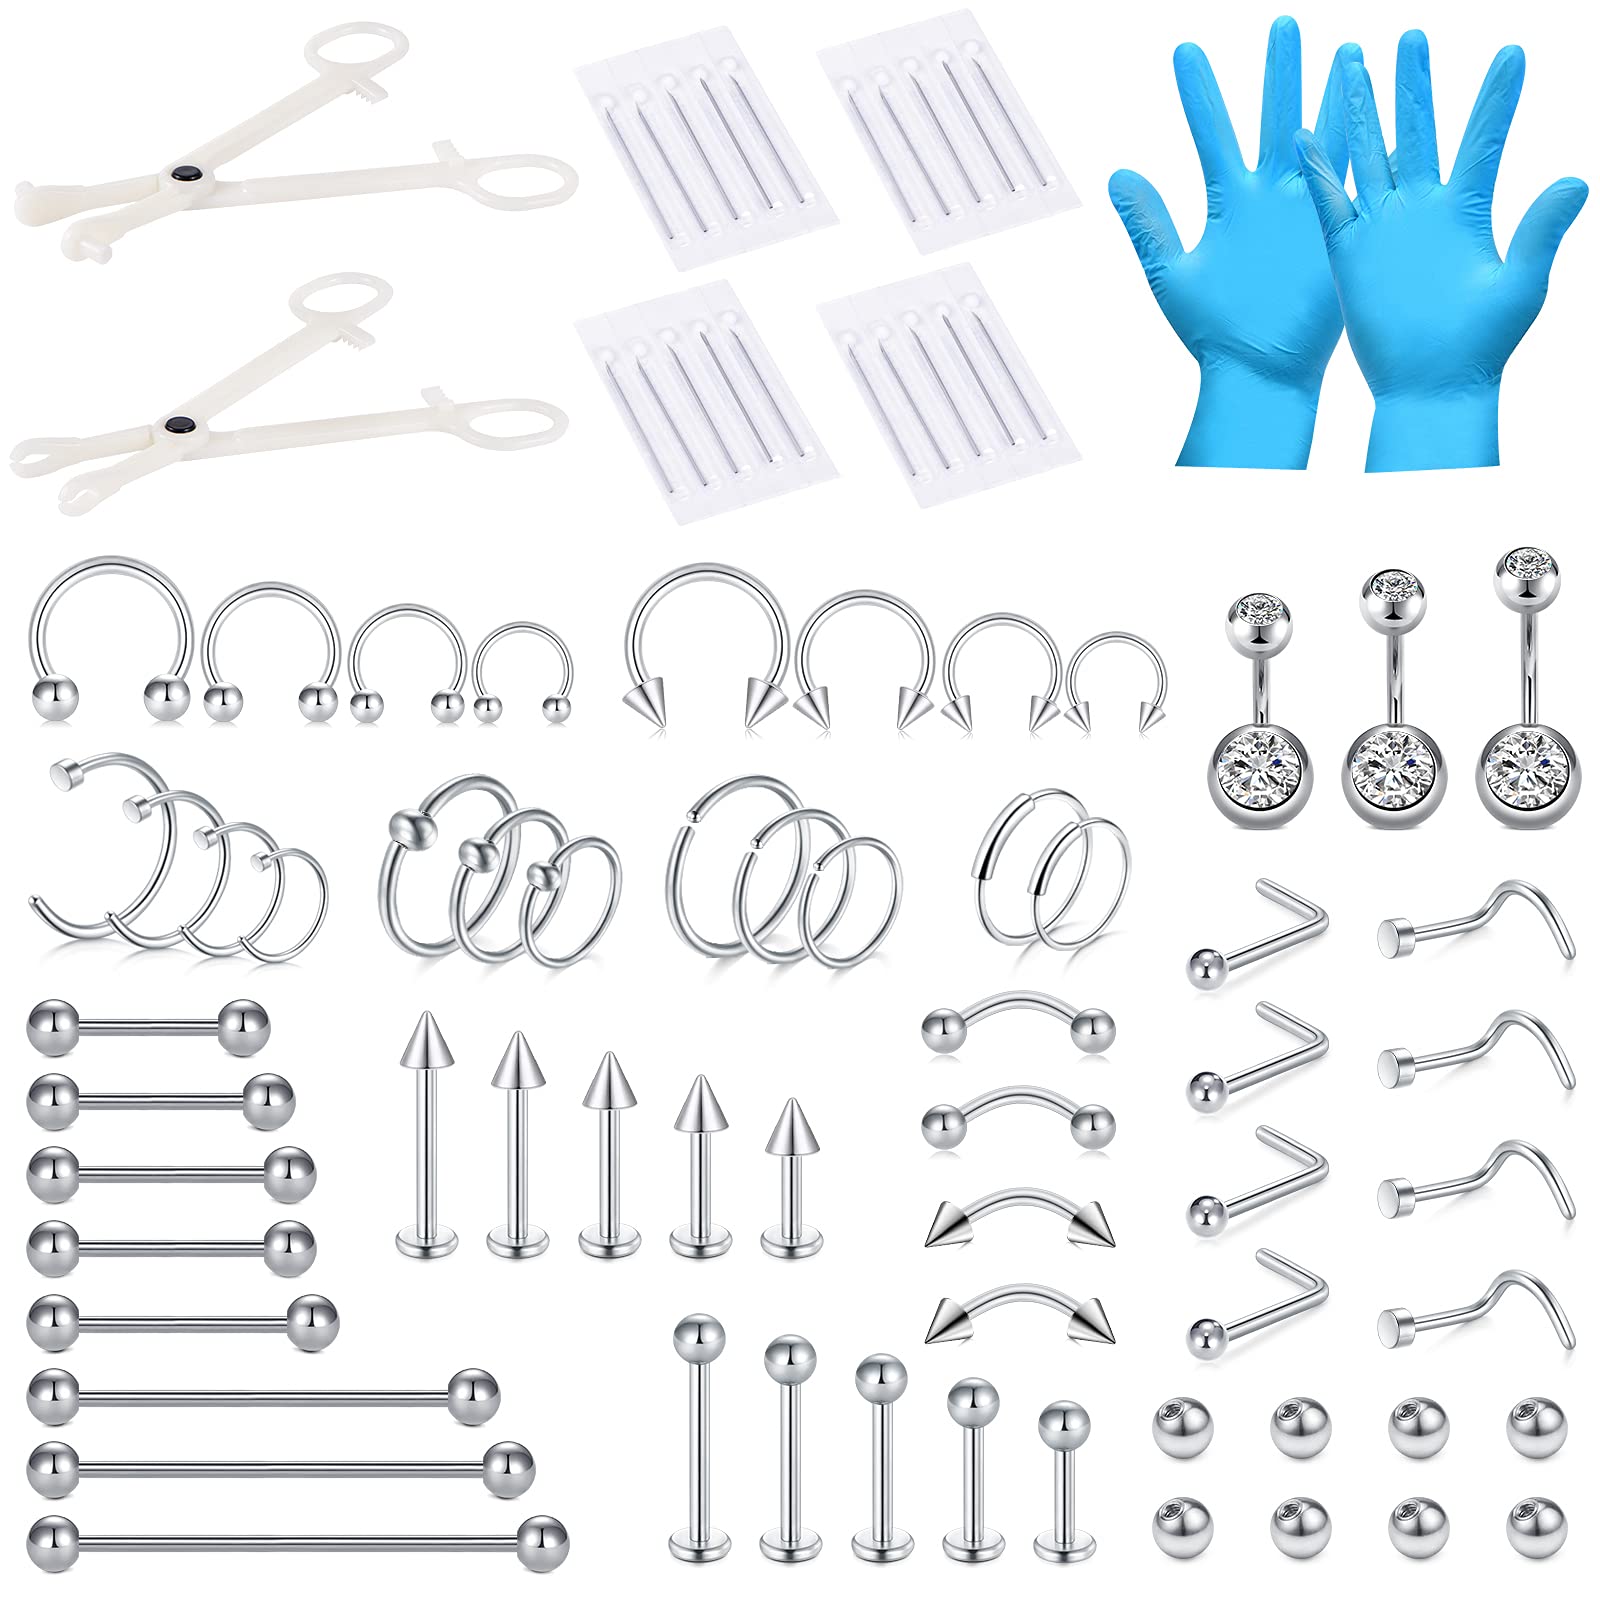 75PCS Mixed-size Piercing Kits for All Piercings,Stainless Steel Piercing  Kit 14G 16G 18G 20G Piecing Needles for Ear Cartilage Tragus Nose Septum  Lip Nipple Piercing Tools 1-75PCS-Mixed-size